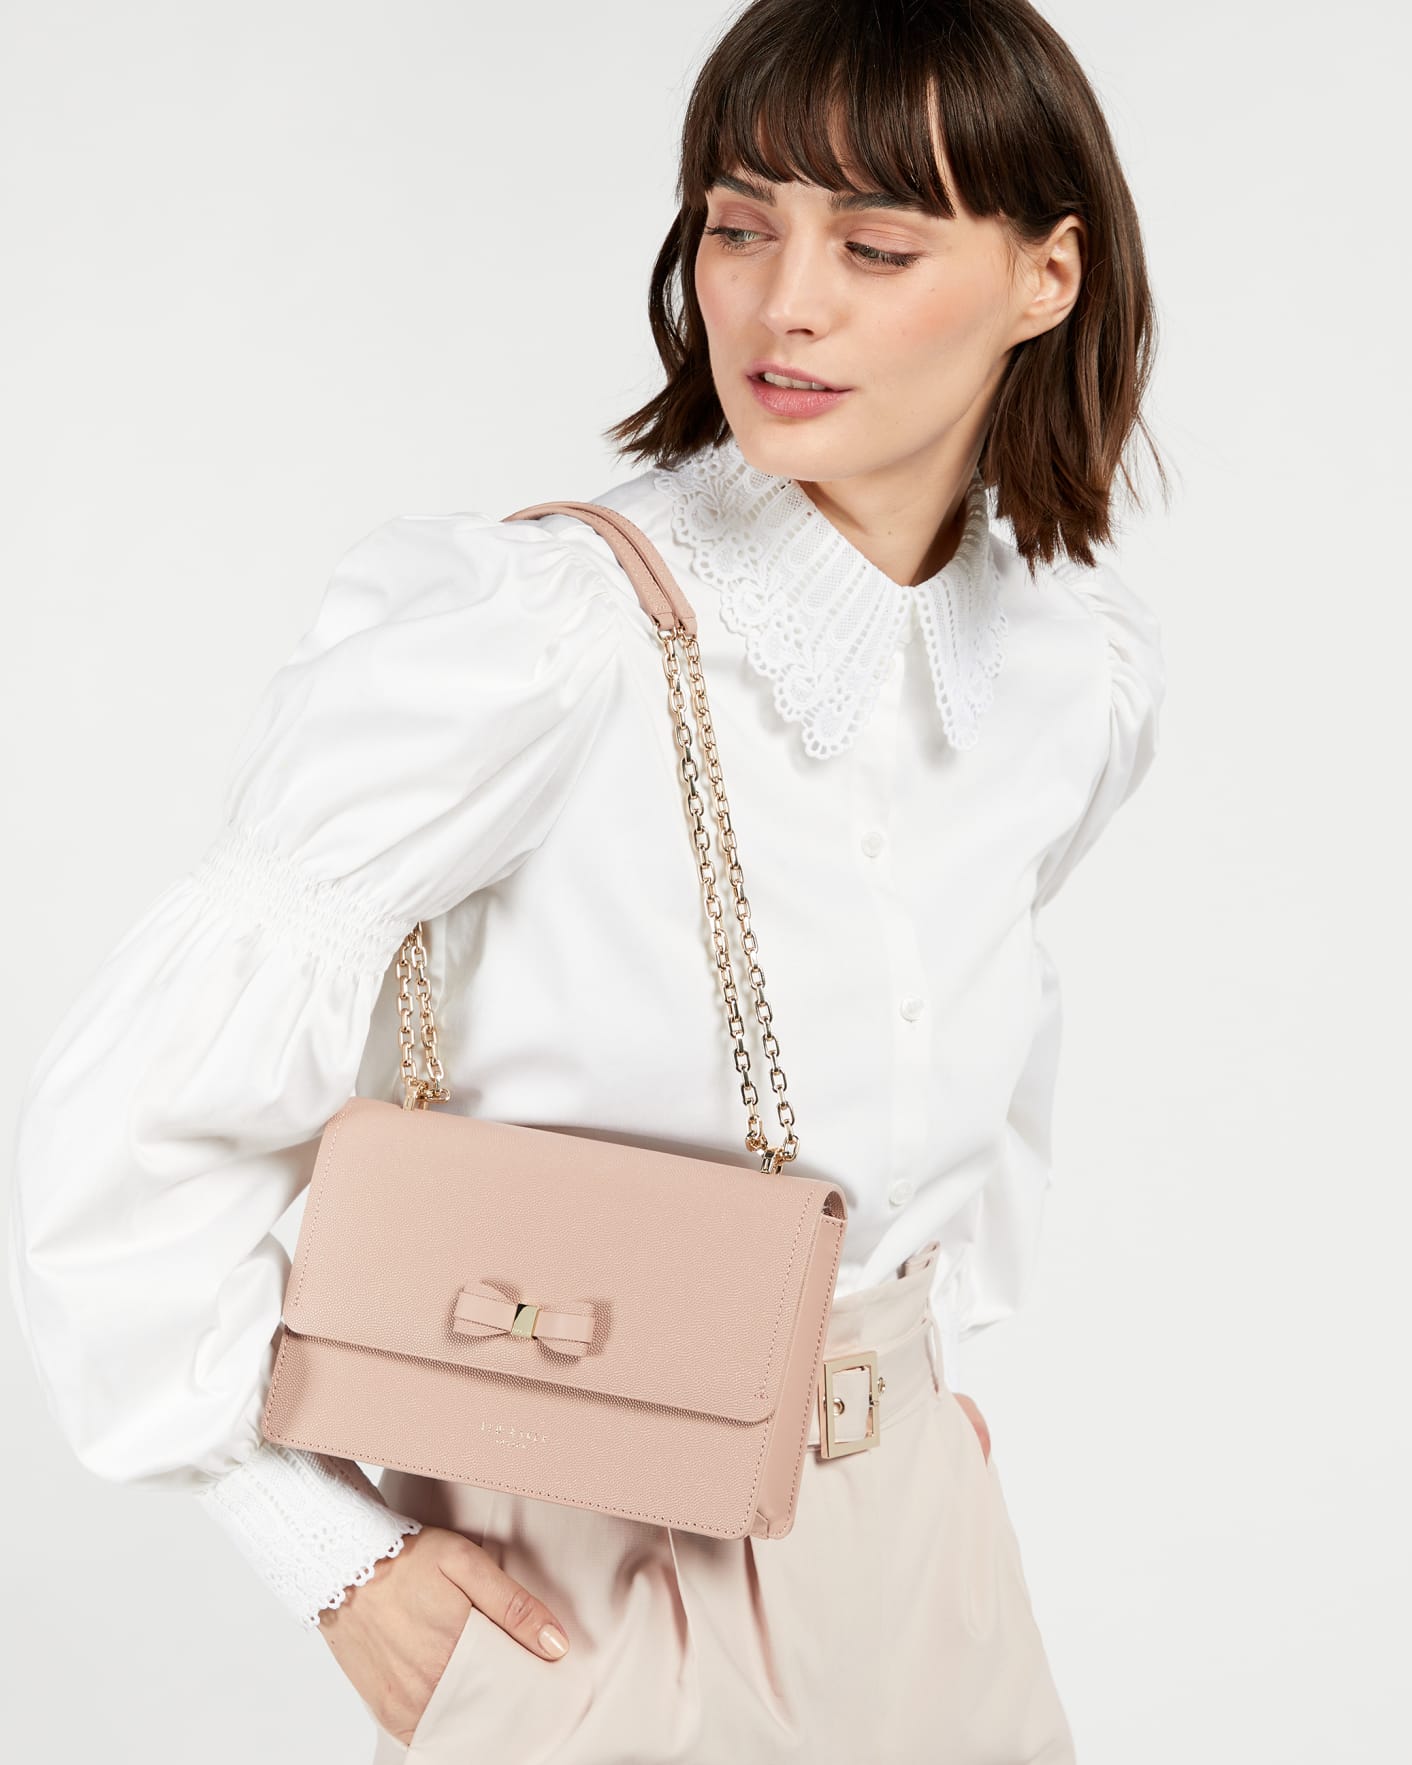 Ted Baker London, Bags, Ted Baker Gold Tone Chain Leather Bag